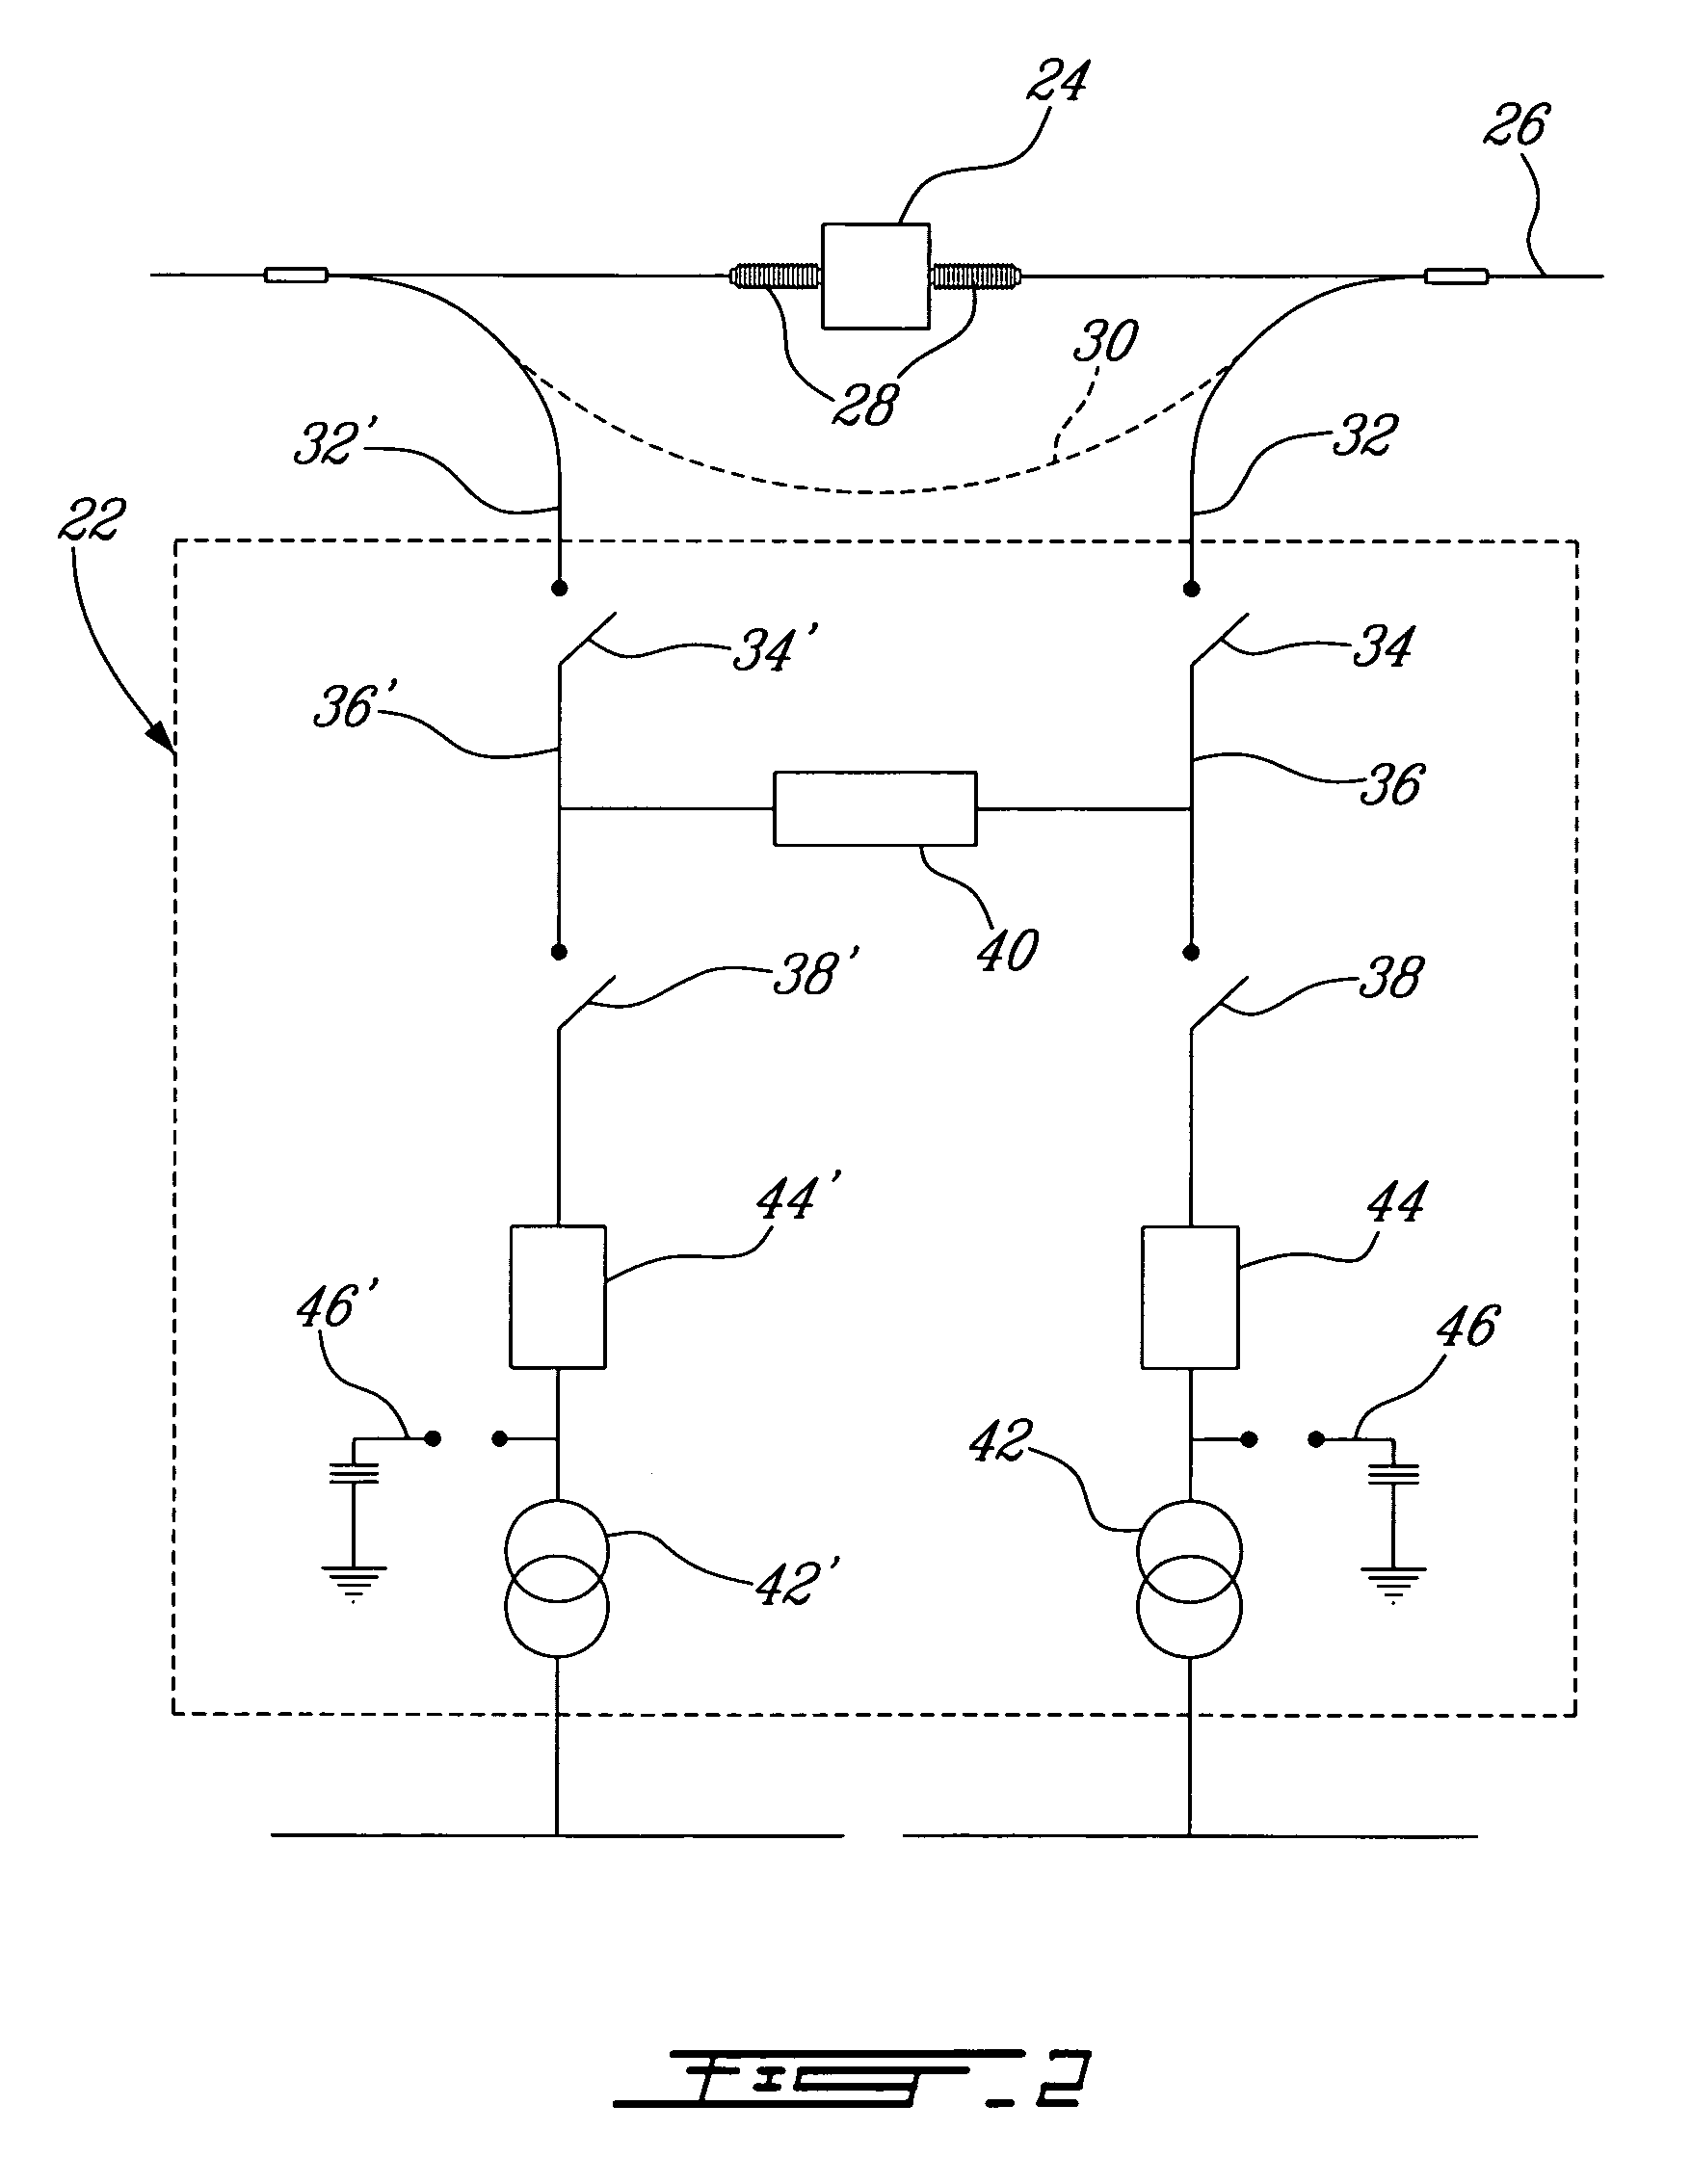 Method for tapping a high voltage transmission line and substation using the same